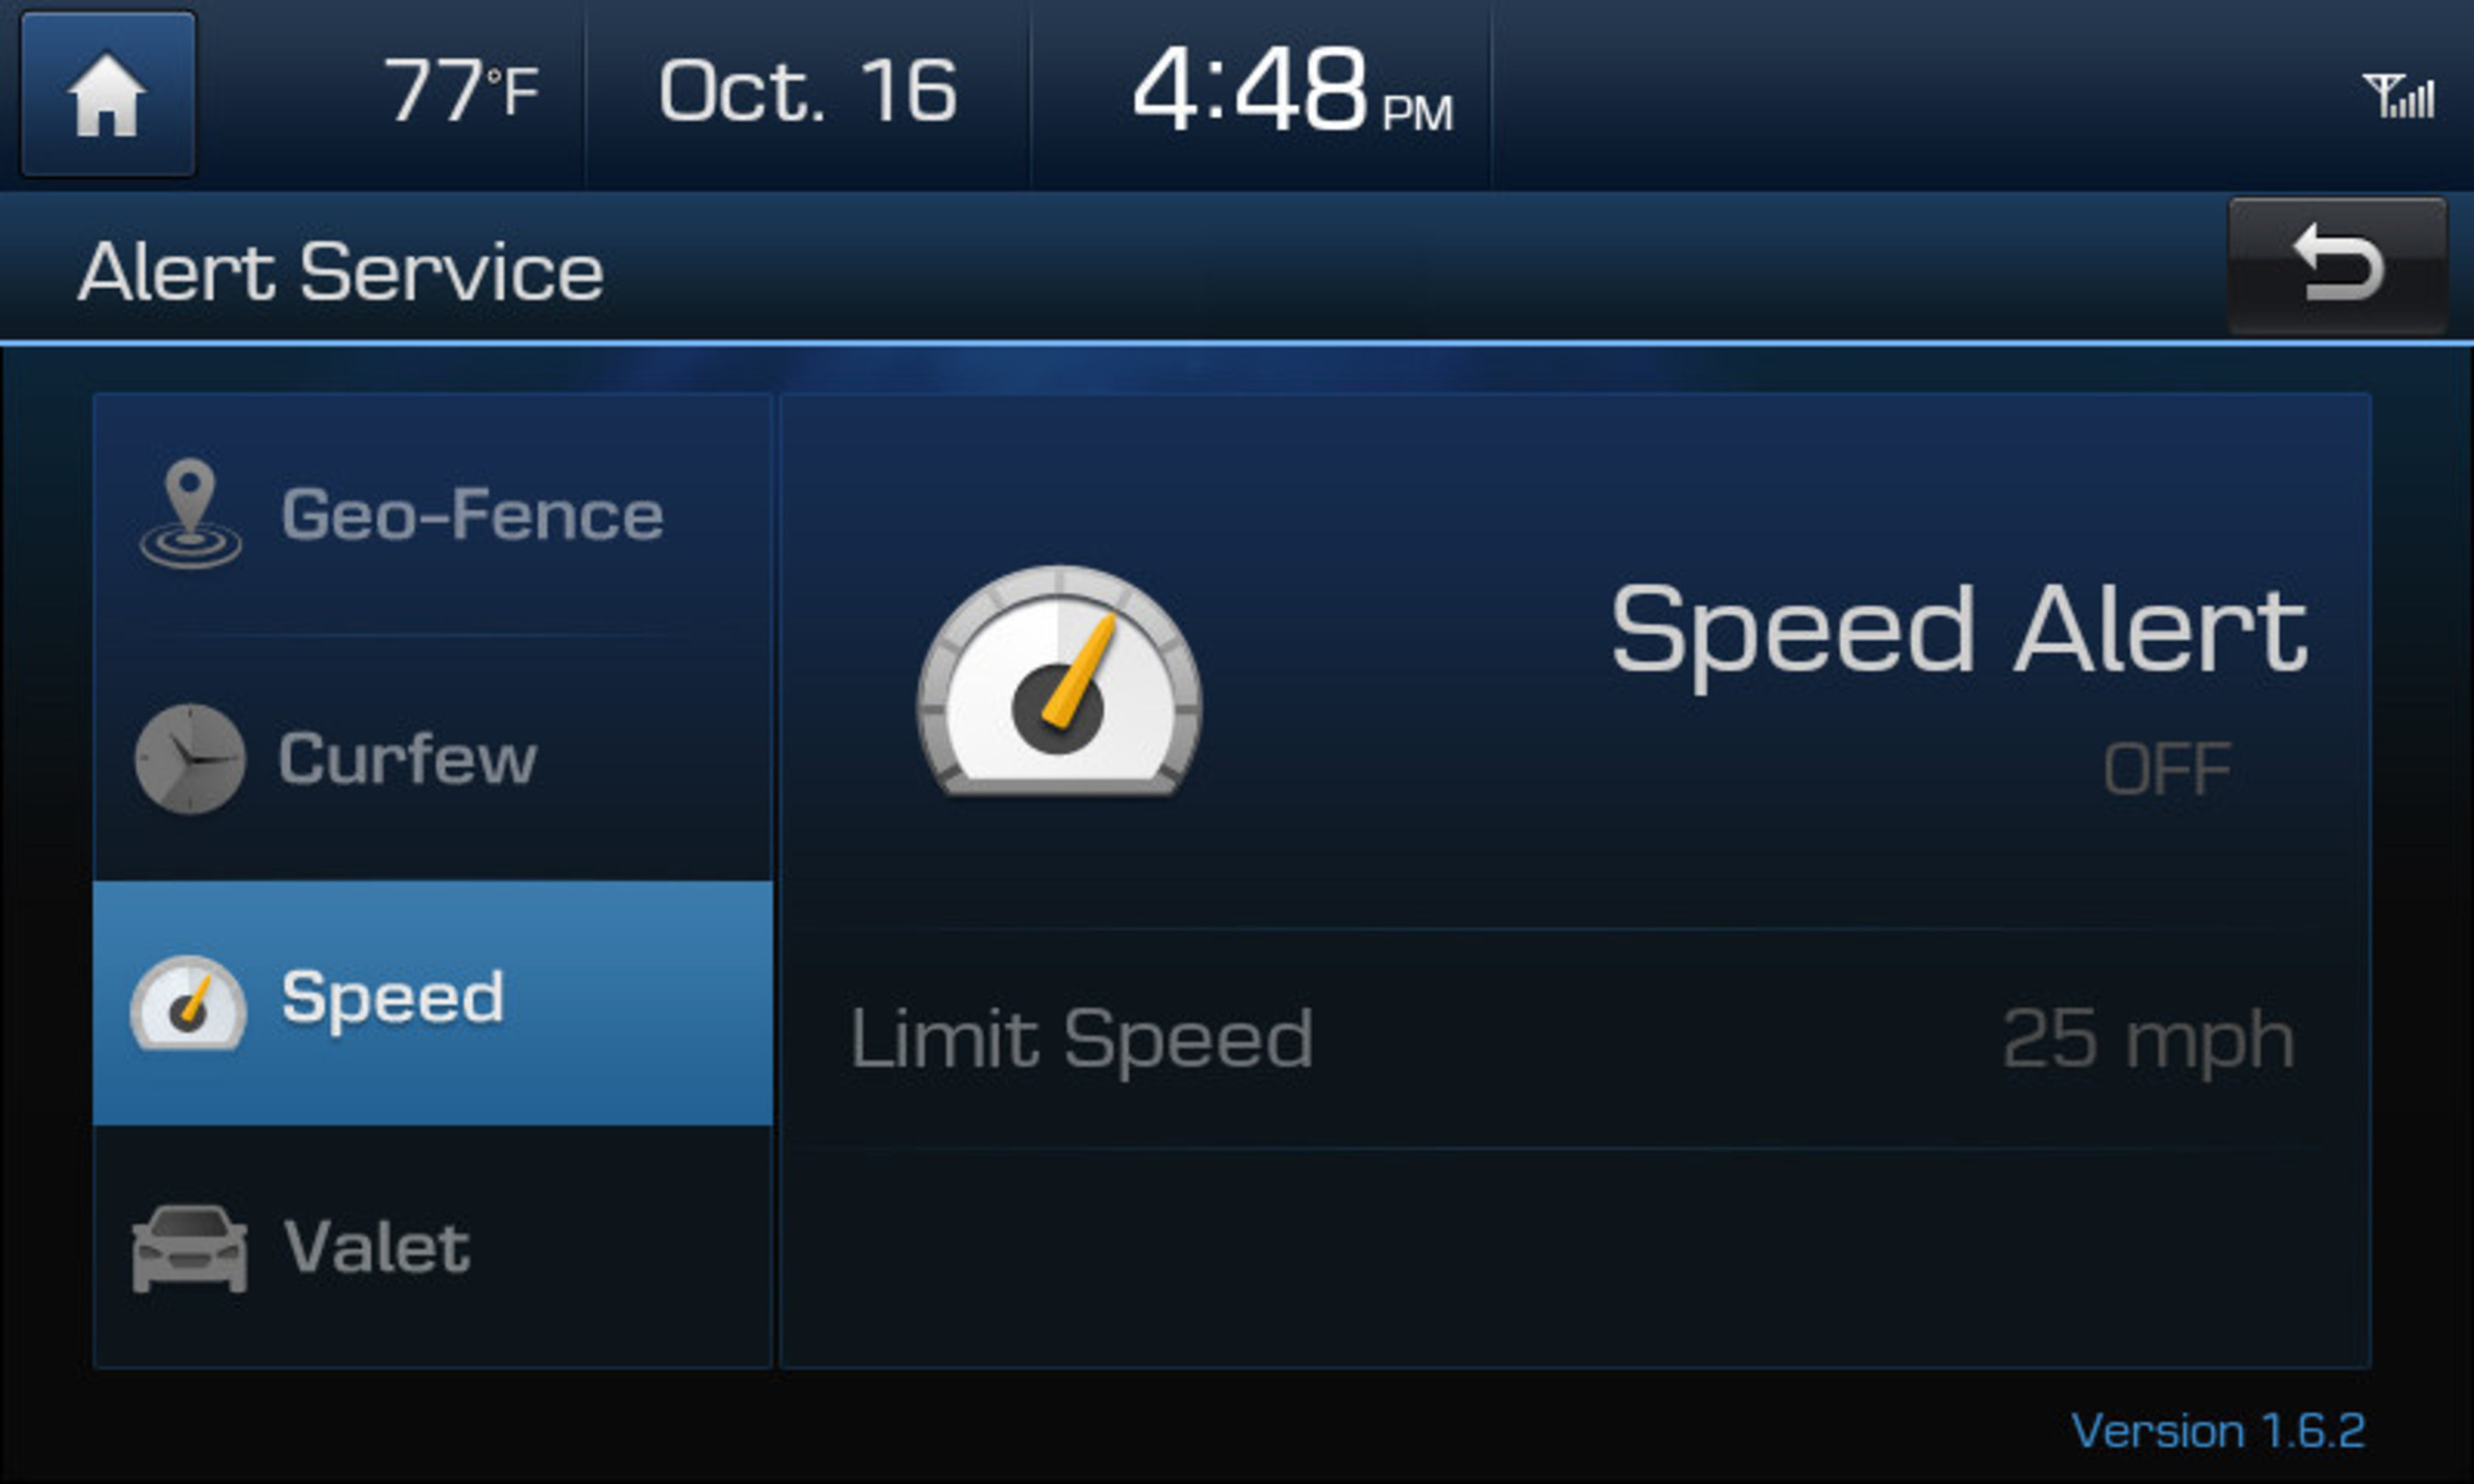 Hyundai Blue Link Vehicle Safeguards Alerts In-Vehicle App Speed Alert on the multimedia screen of a 2015 Azera